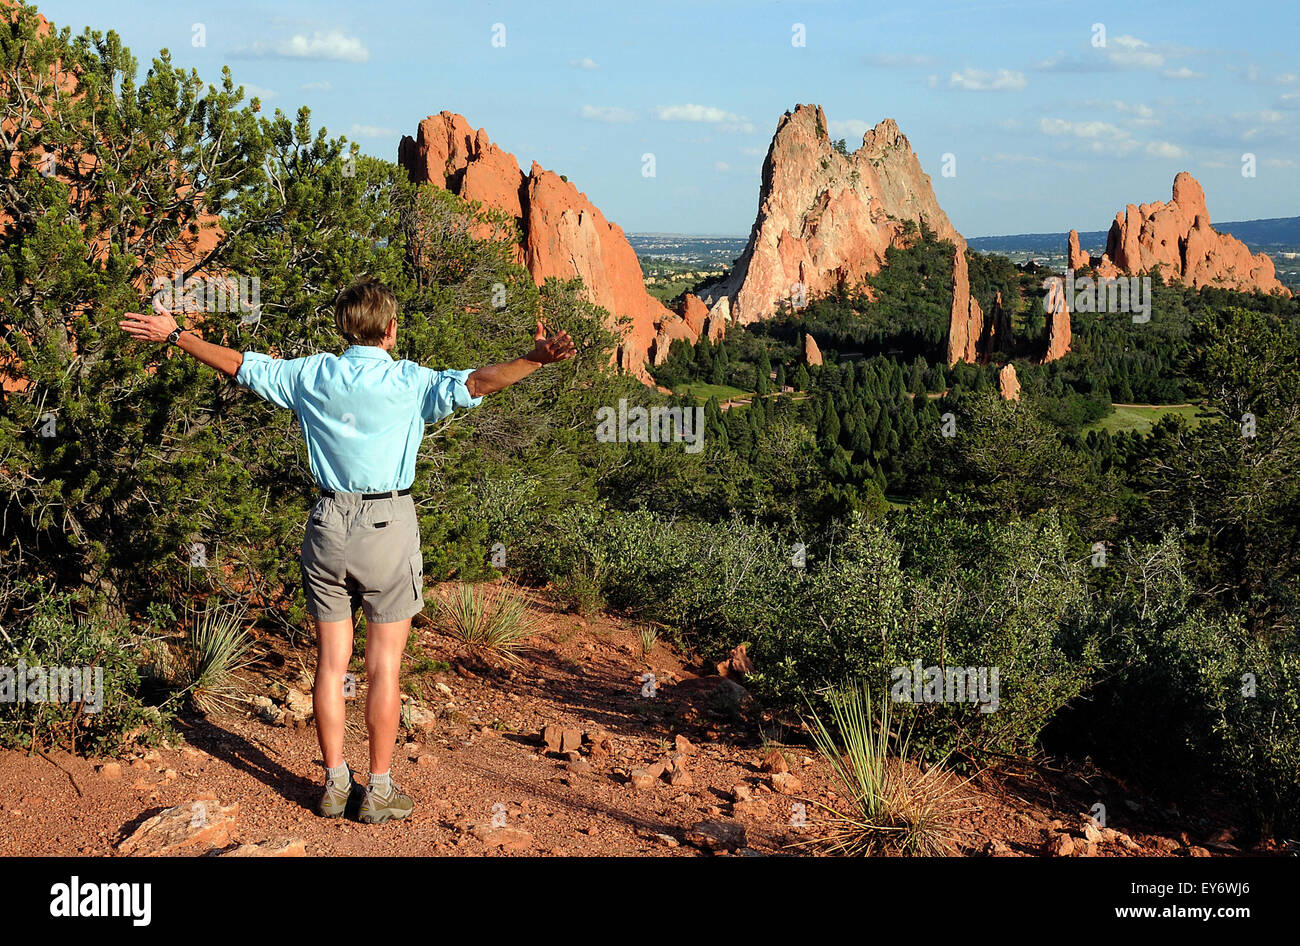 A hiker enjoys the expansive view into the Central Garden from one of the many trails in the Garden of the Gods. The Garden of the Gods is one of the most popular city parks in the United States and offers urban hiking, rock climbing, horseback riding and cycling within just a few minutes of the city of Colorado Springs, Colorado. Stock Photo